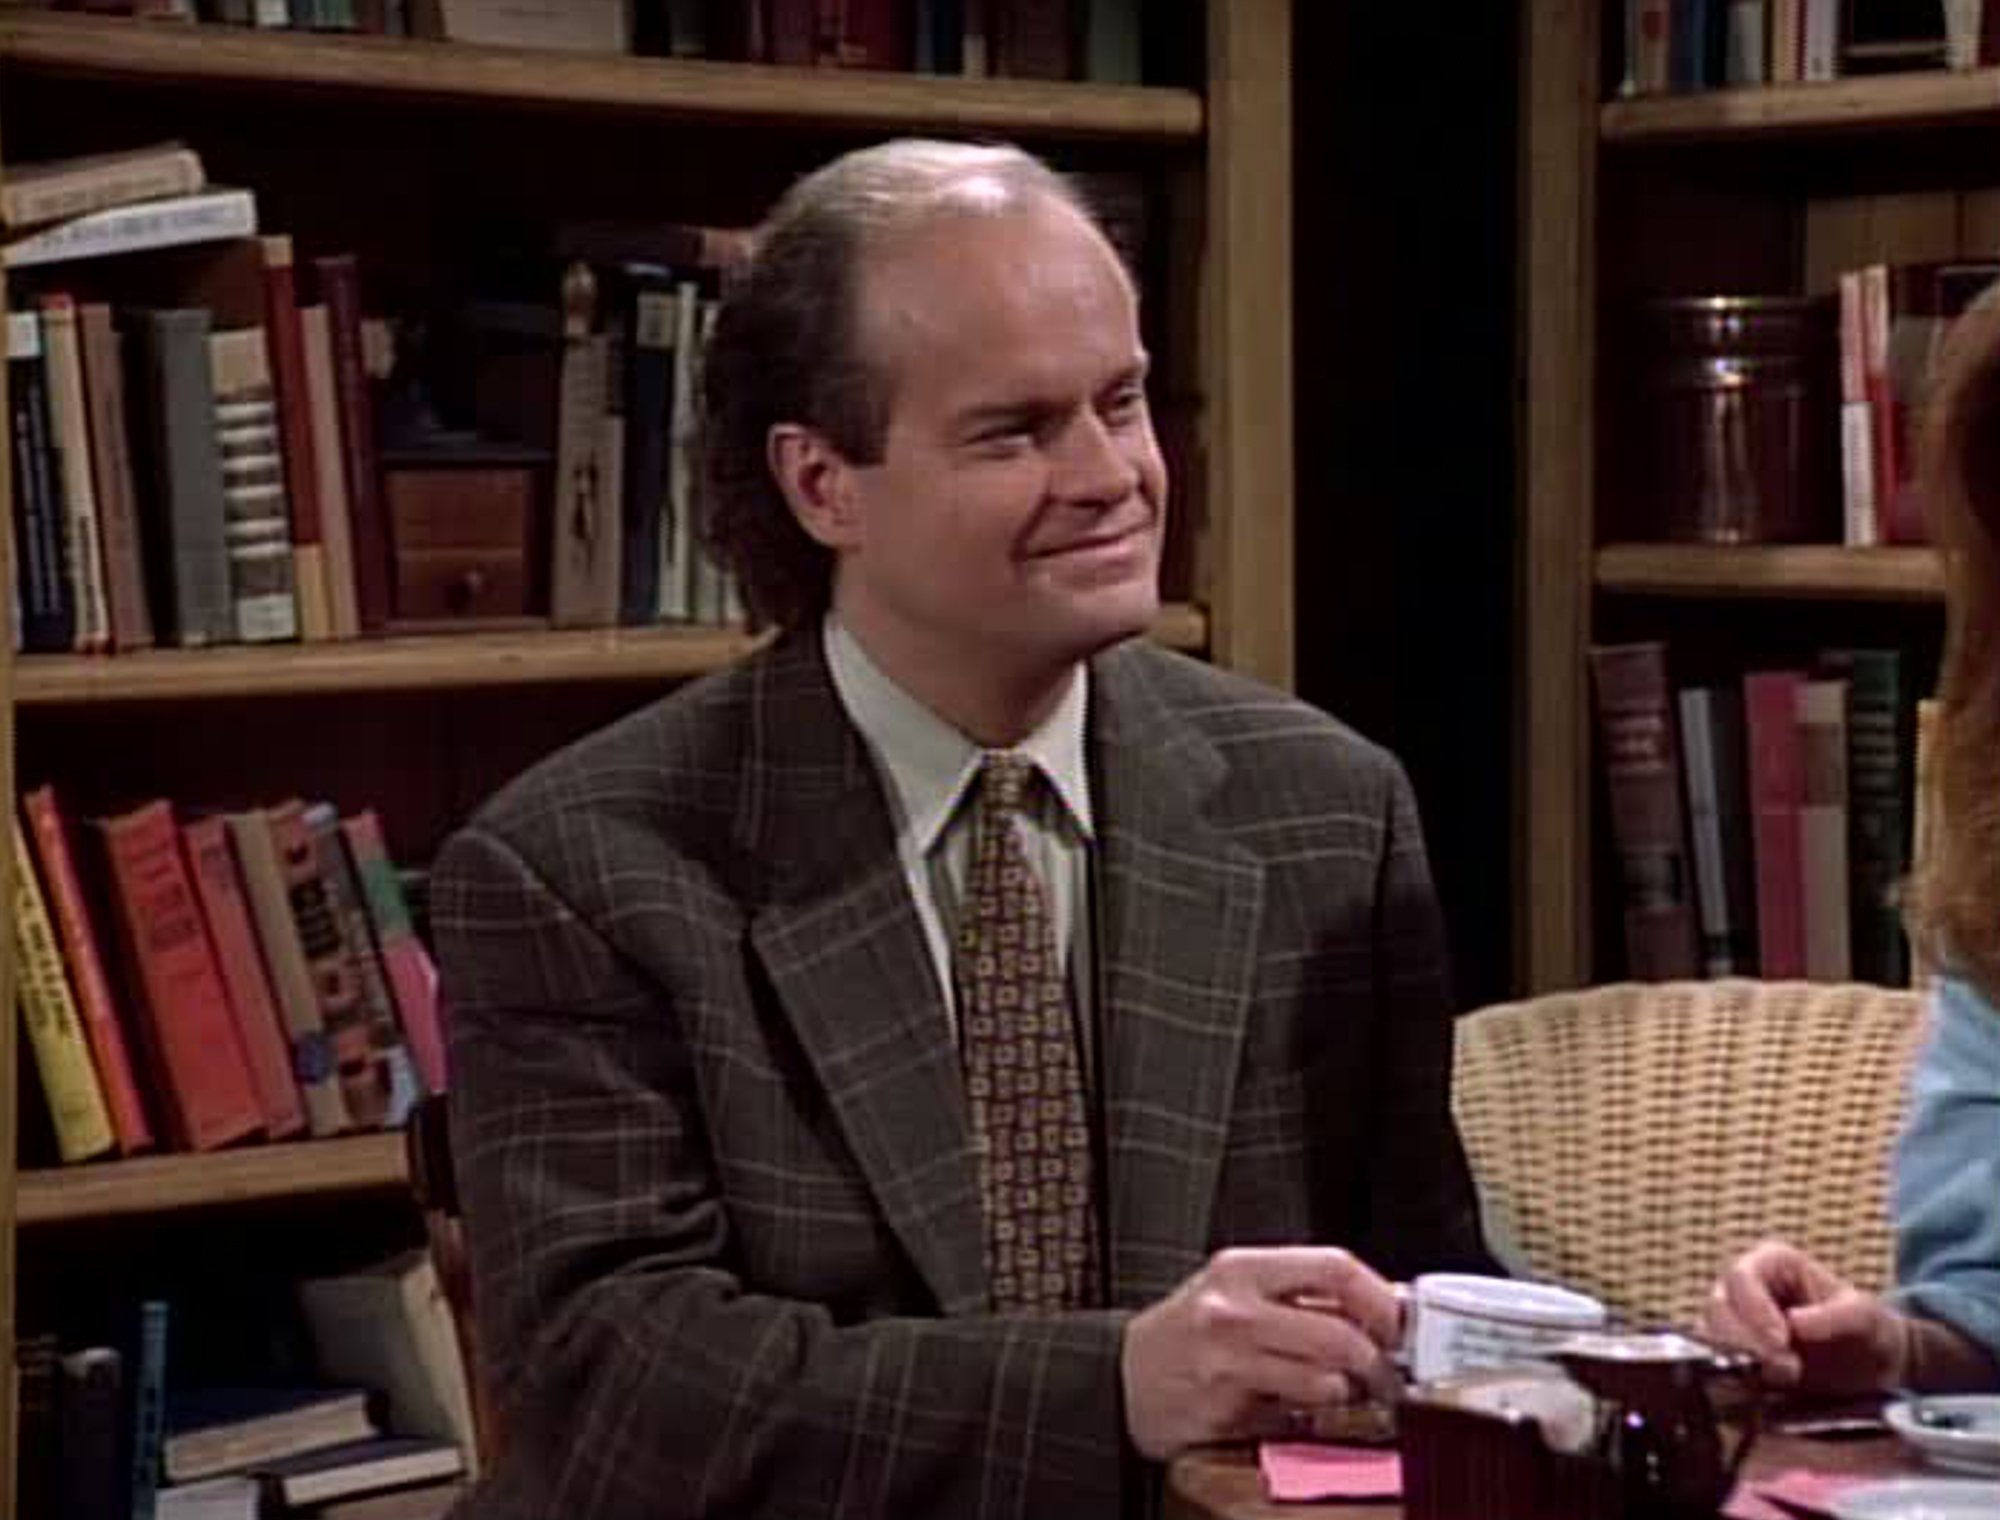 'Frasier': Kelsey Grammer sits with a cup of tea in front of bookshelves